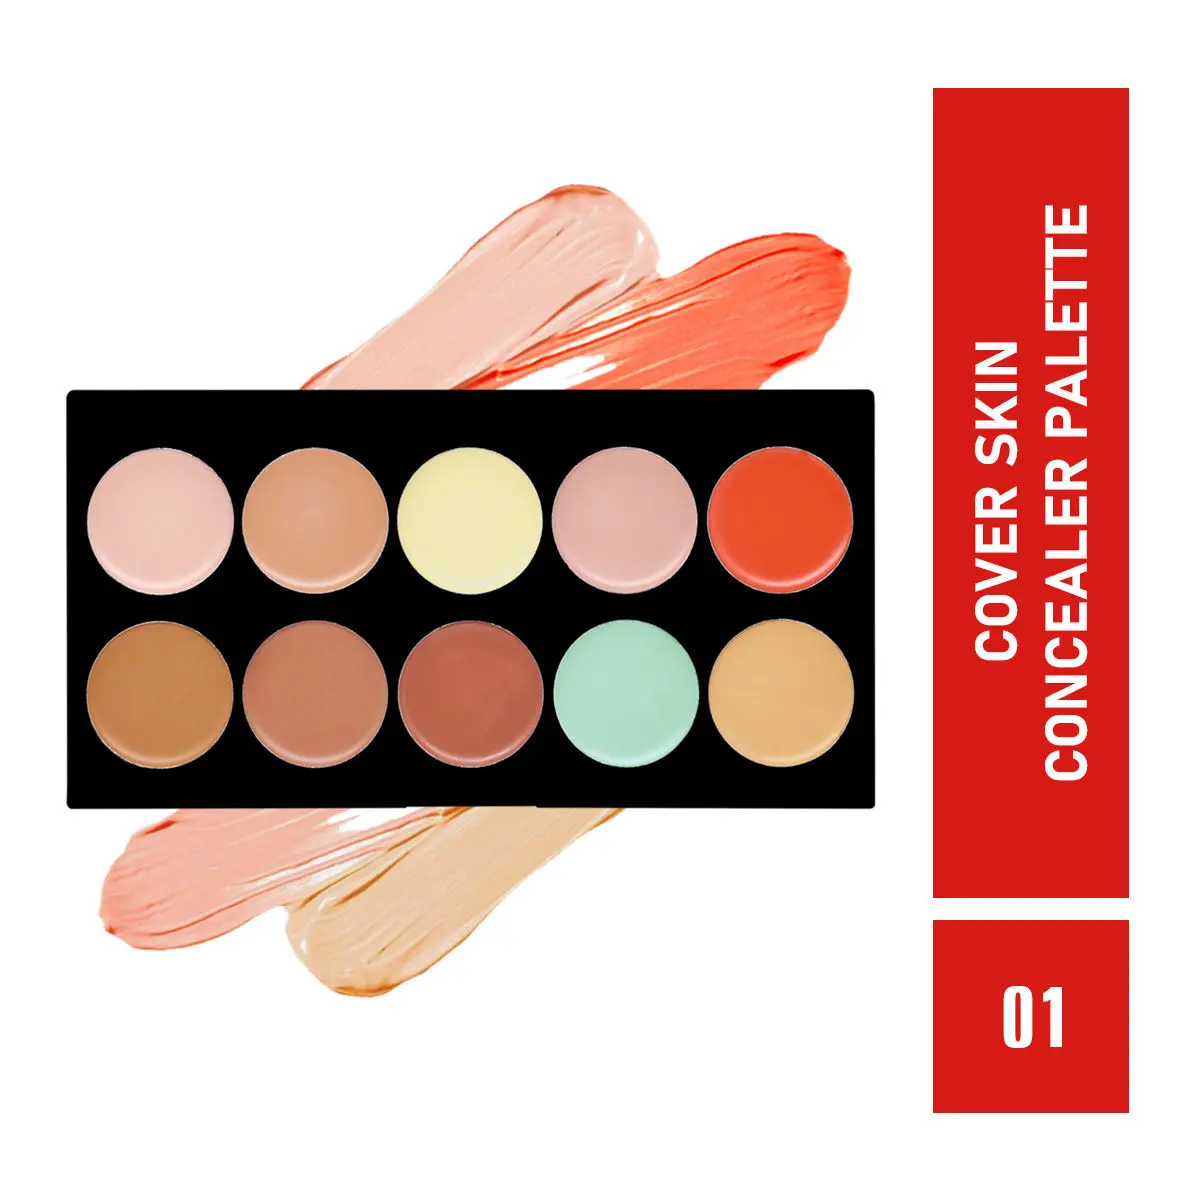 Mattlook Cover Skin Concealer Palette Full Coverage Colour Correcting Lightweight Long-lasting Waterproof Creamy Formula - 01 (18g)